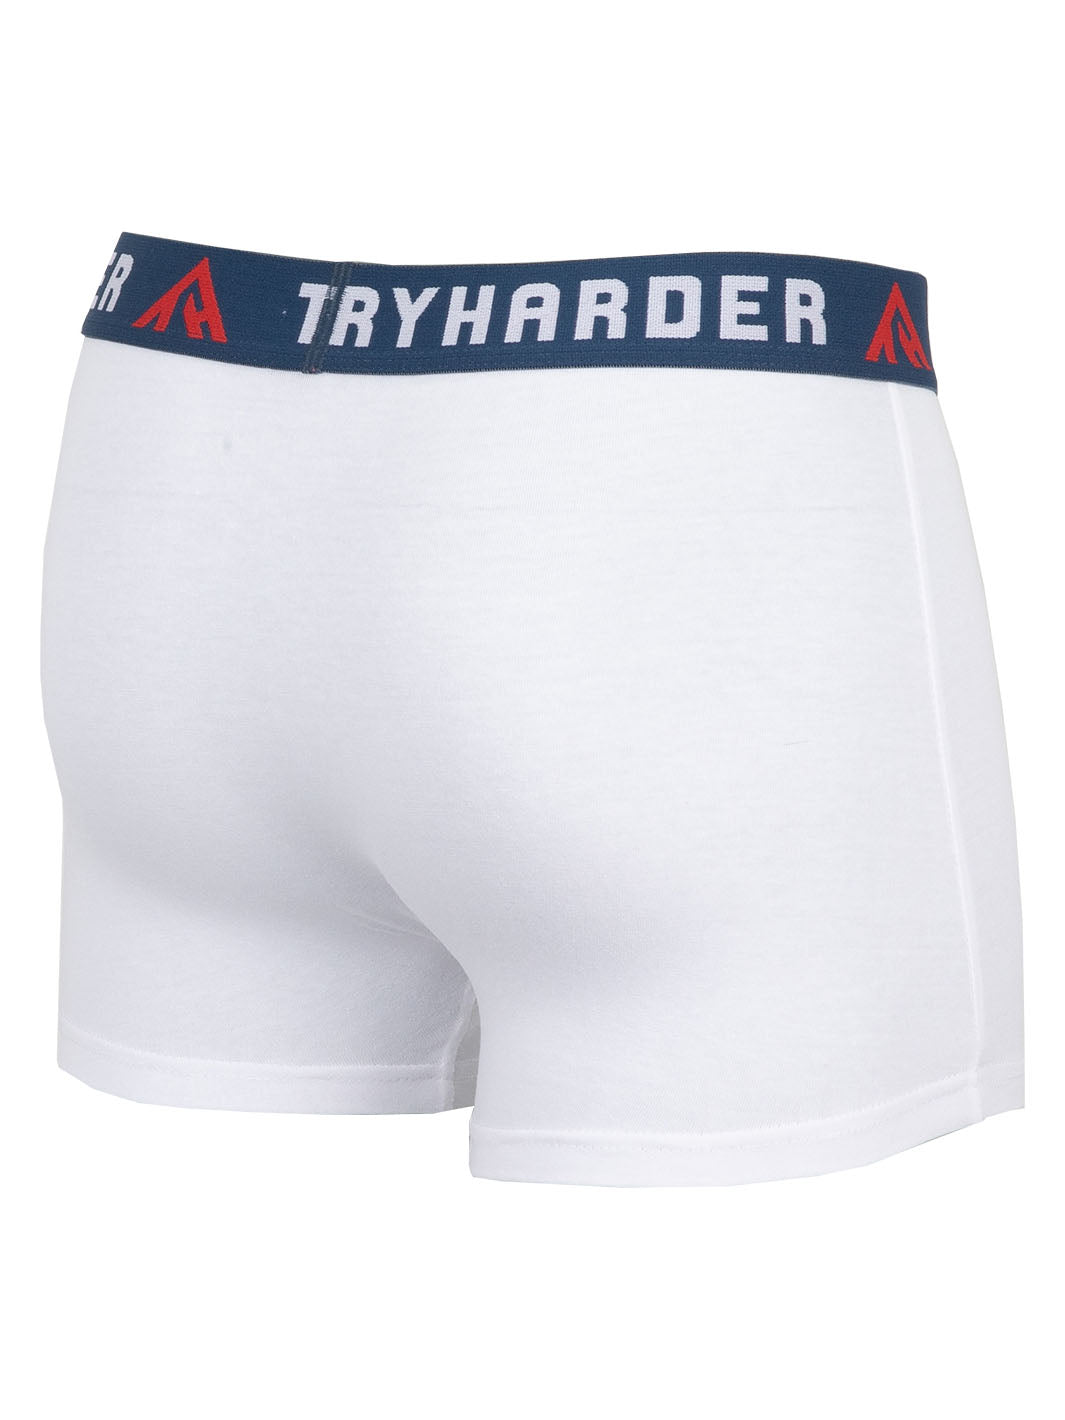 TRYHARDER - Boxer - White 2 pack